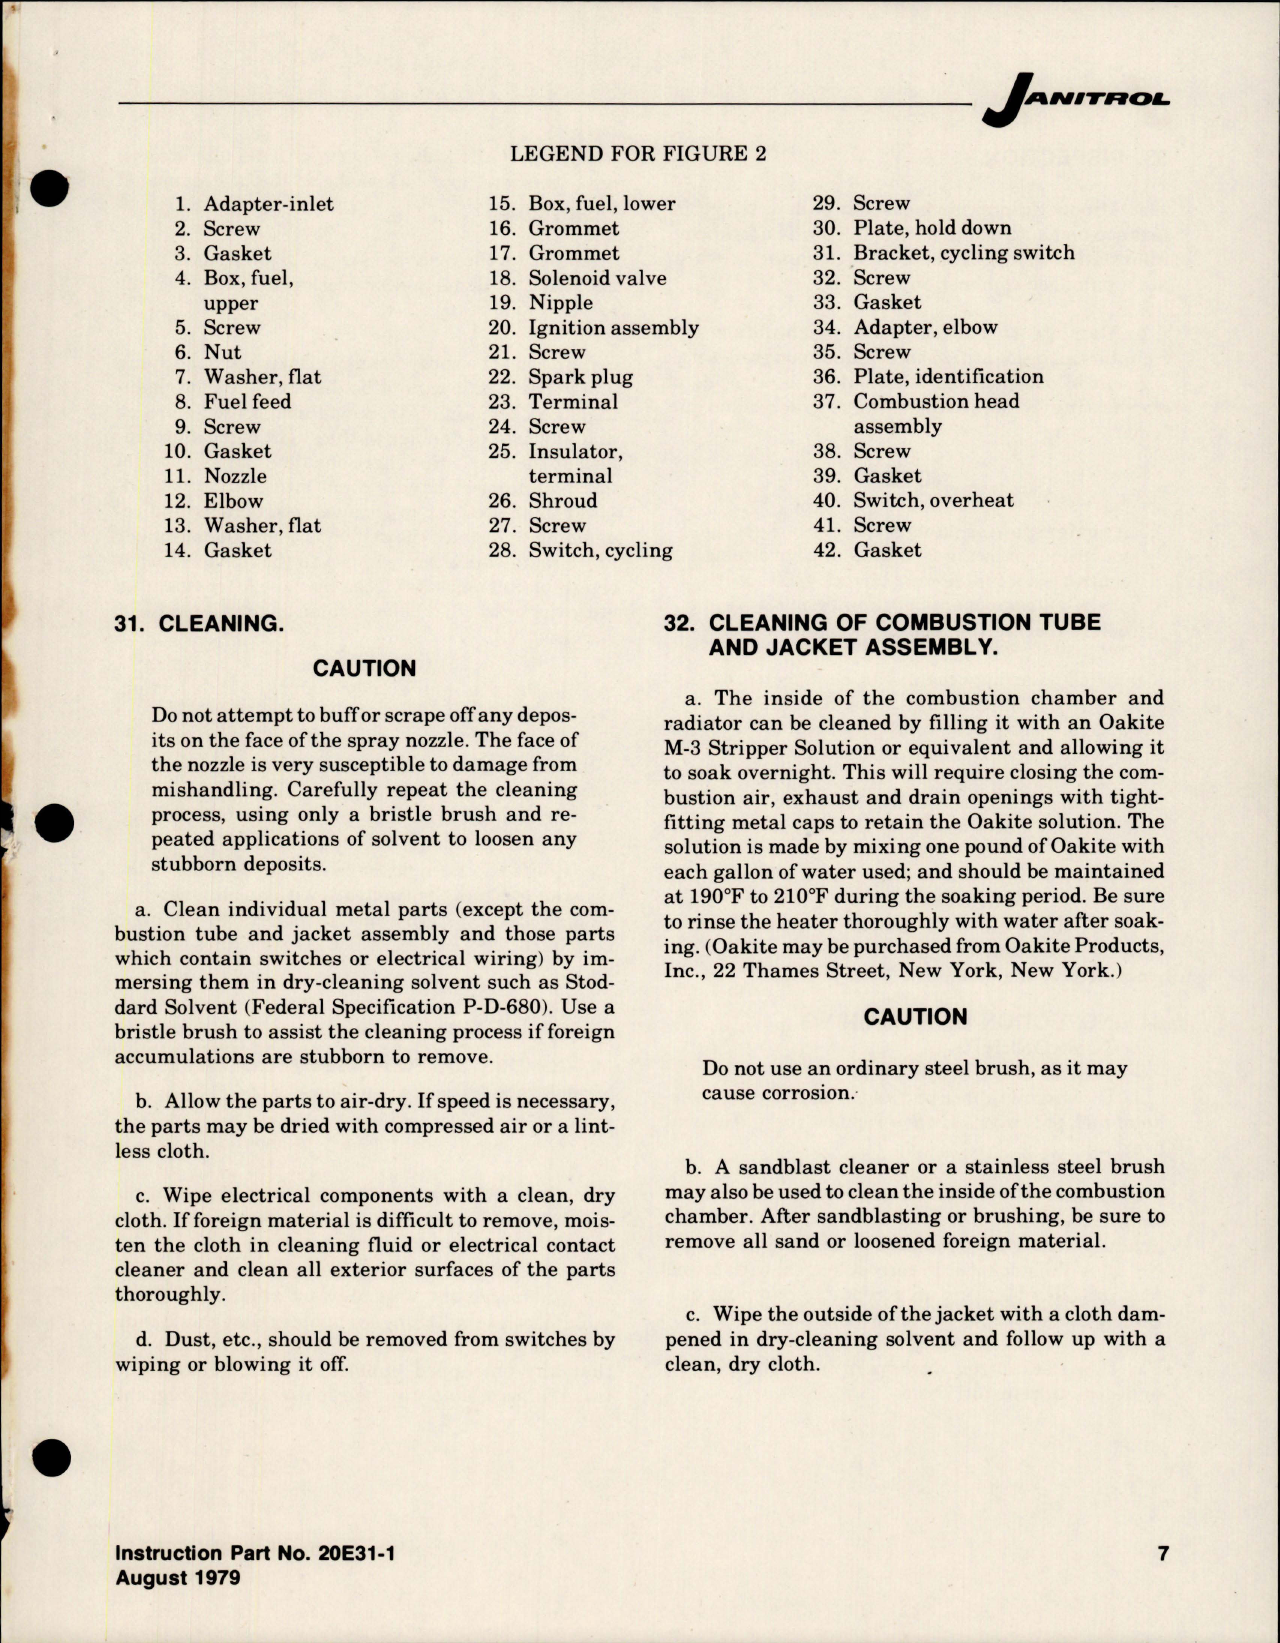 Sample page 7 from AirCorps Library document: Maintenance Instructions for Aircraft Heater Assembly - Part 07E02-1 - B3040 